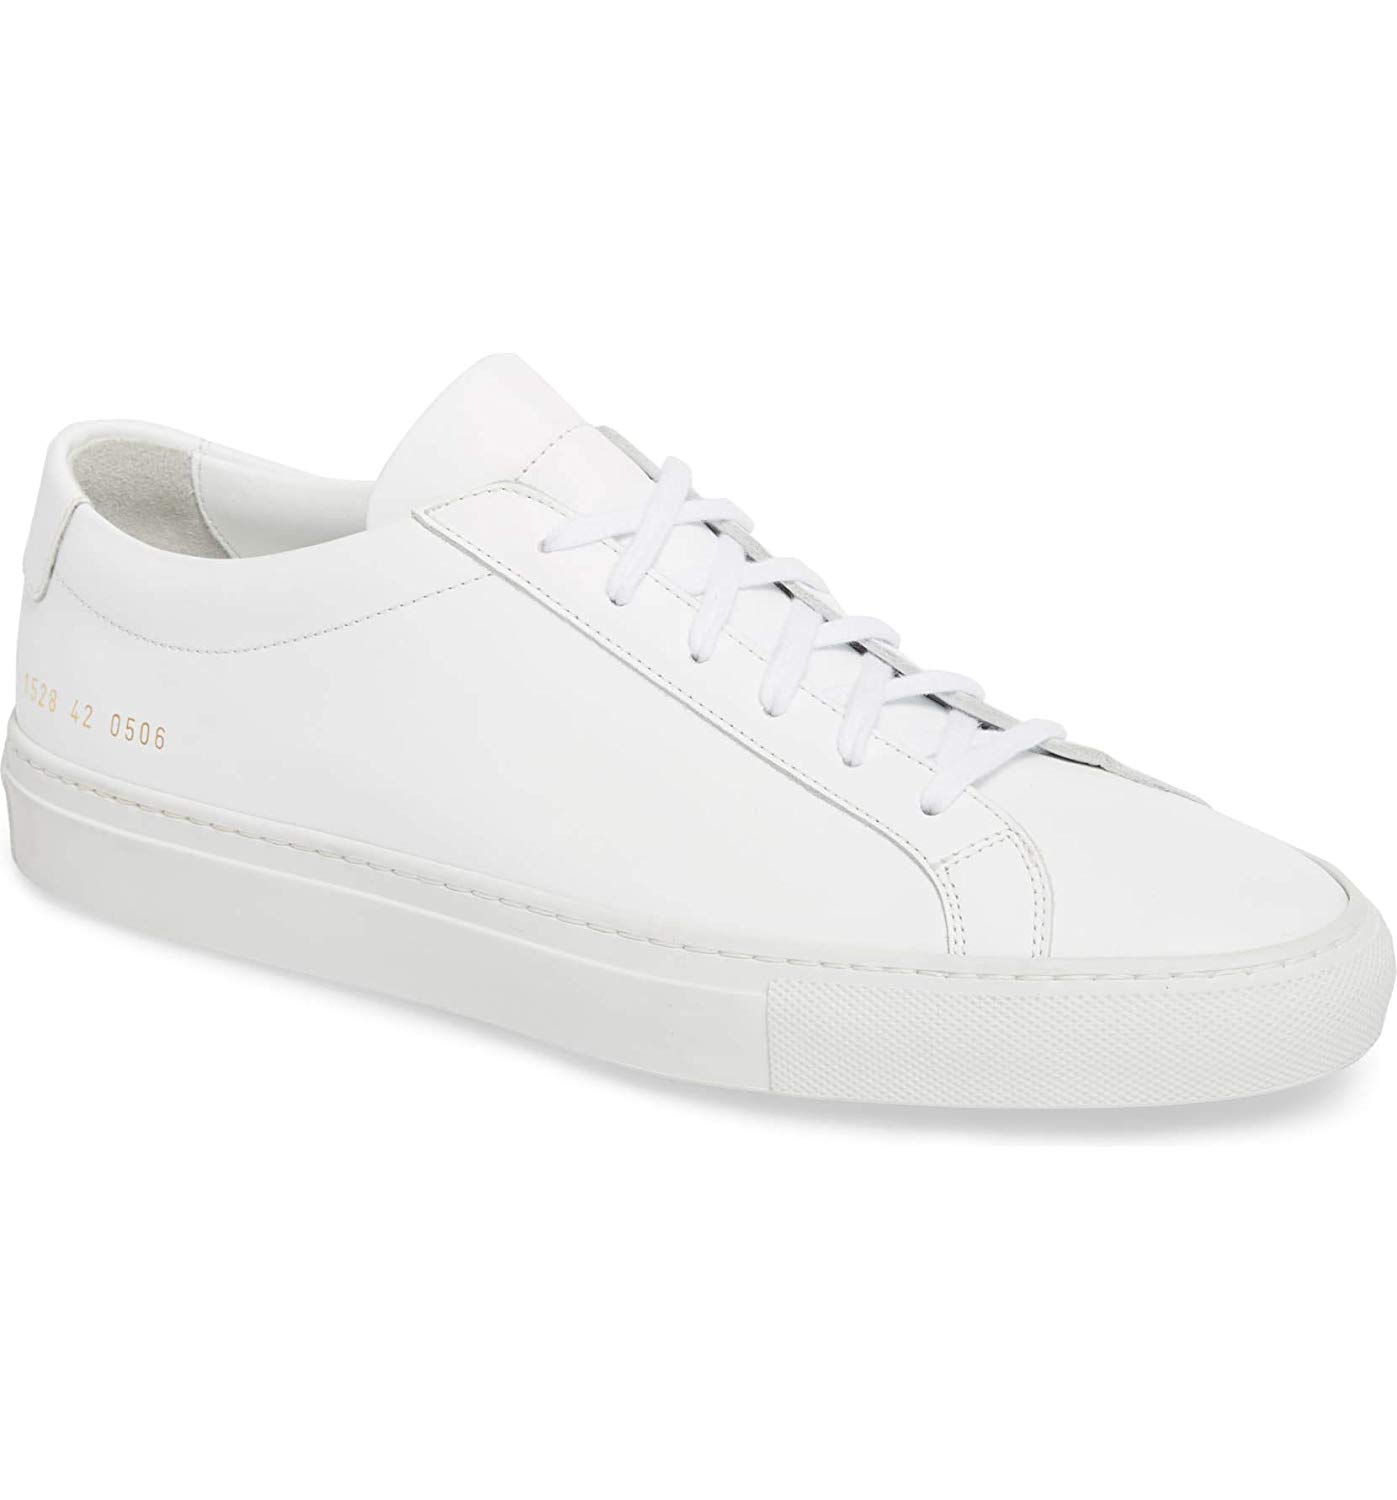 Common Projects Achilles スニーカー